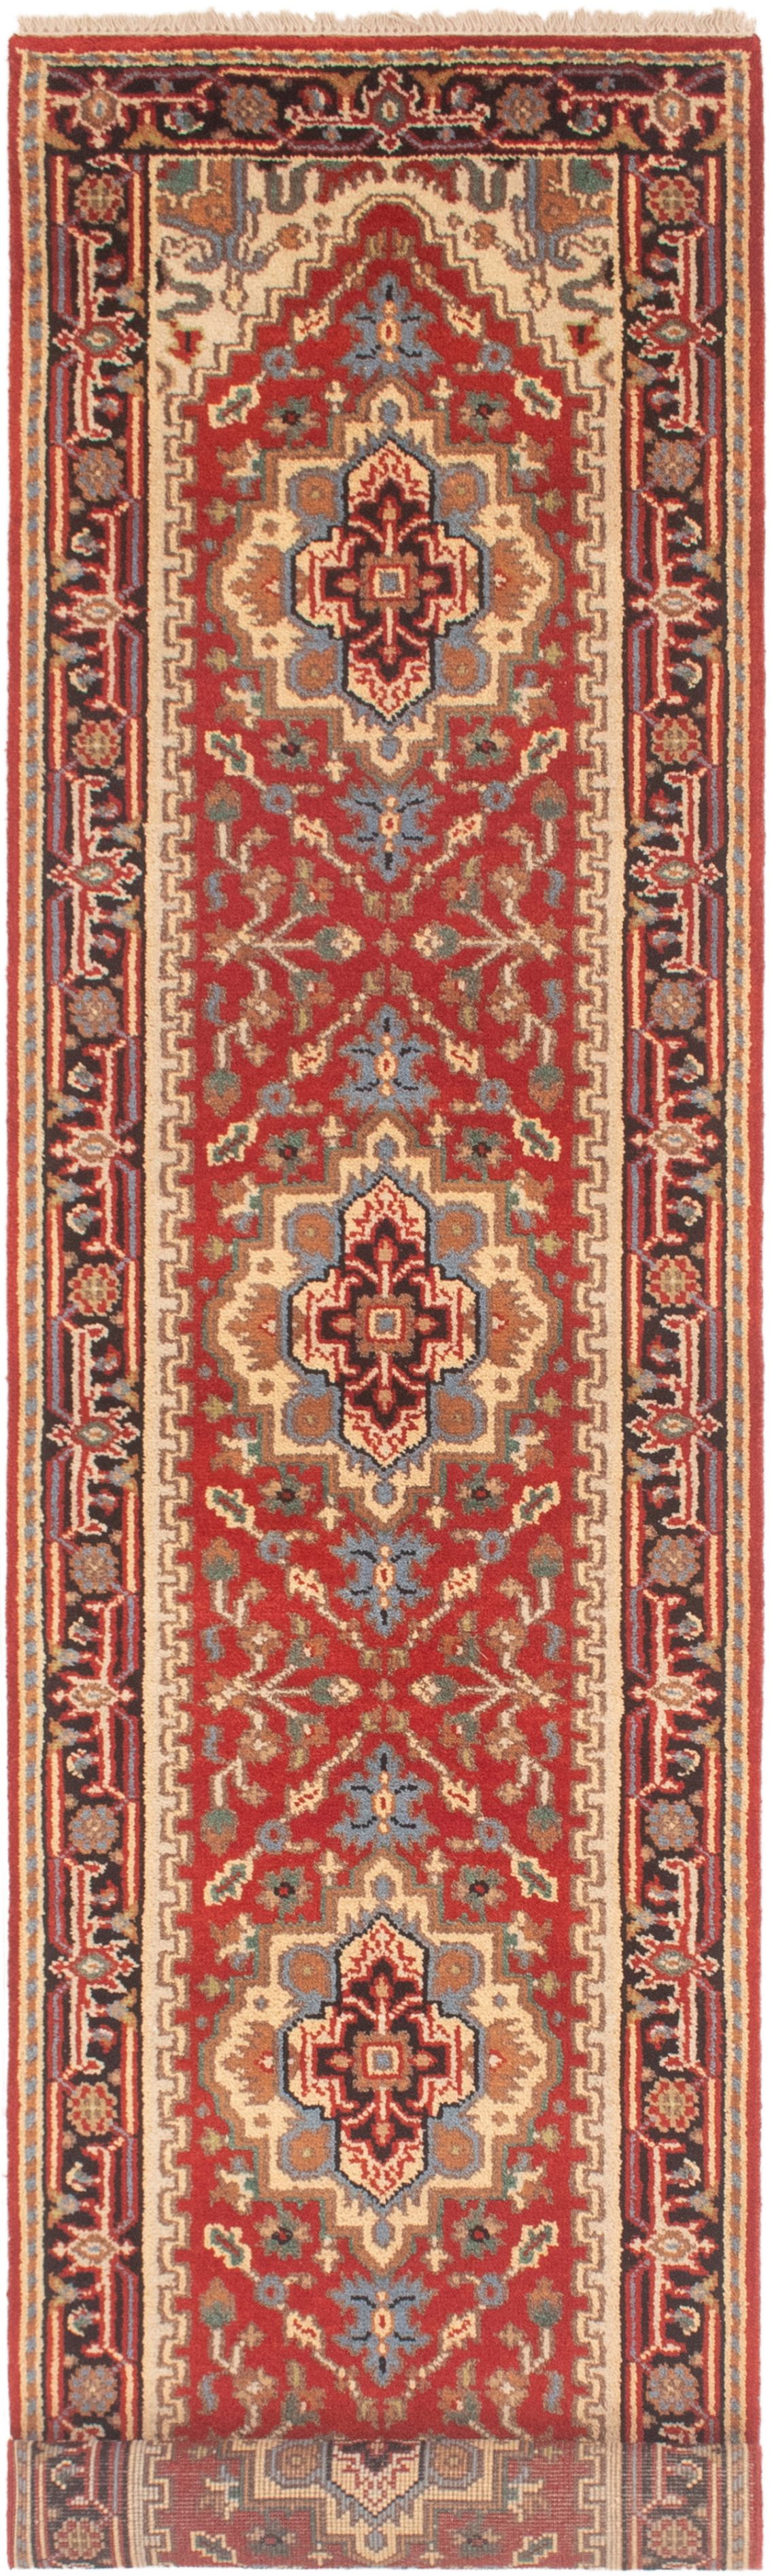 Hand-knotted Serapi Heritage Red Wool Rug 2'6" x 11'10"  Size: 2'6" x 11'10"  